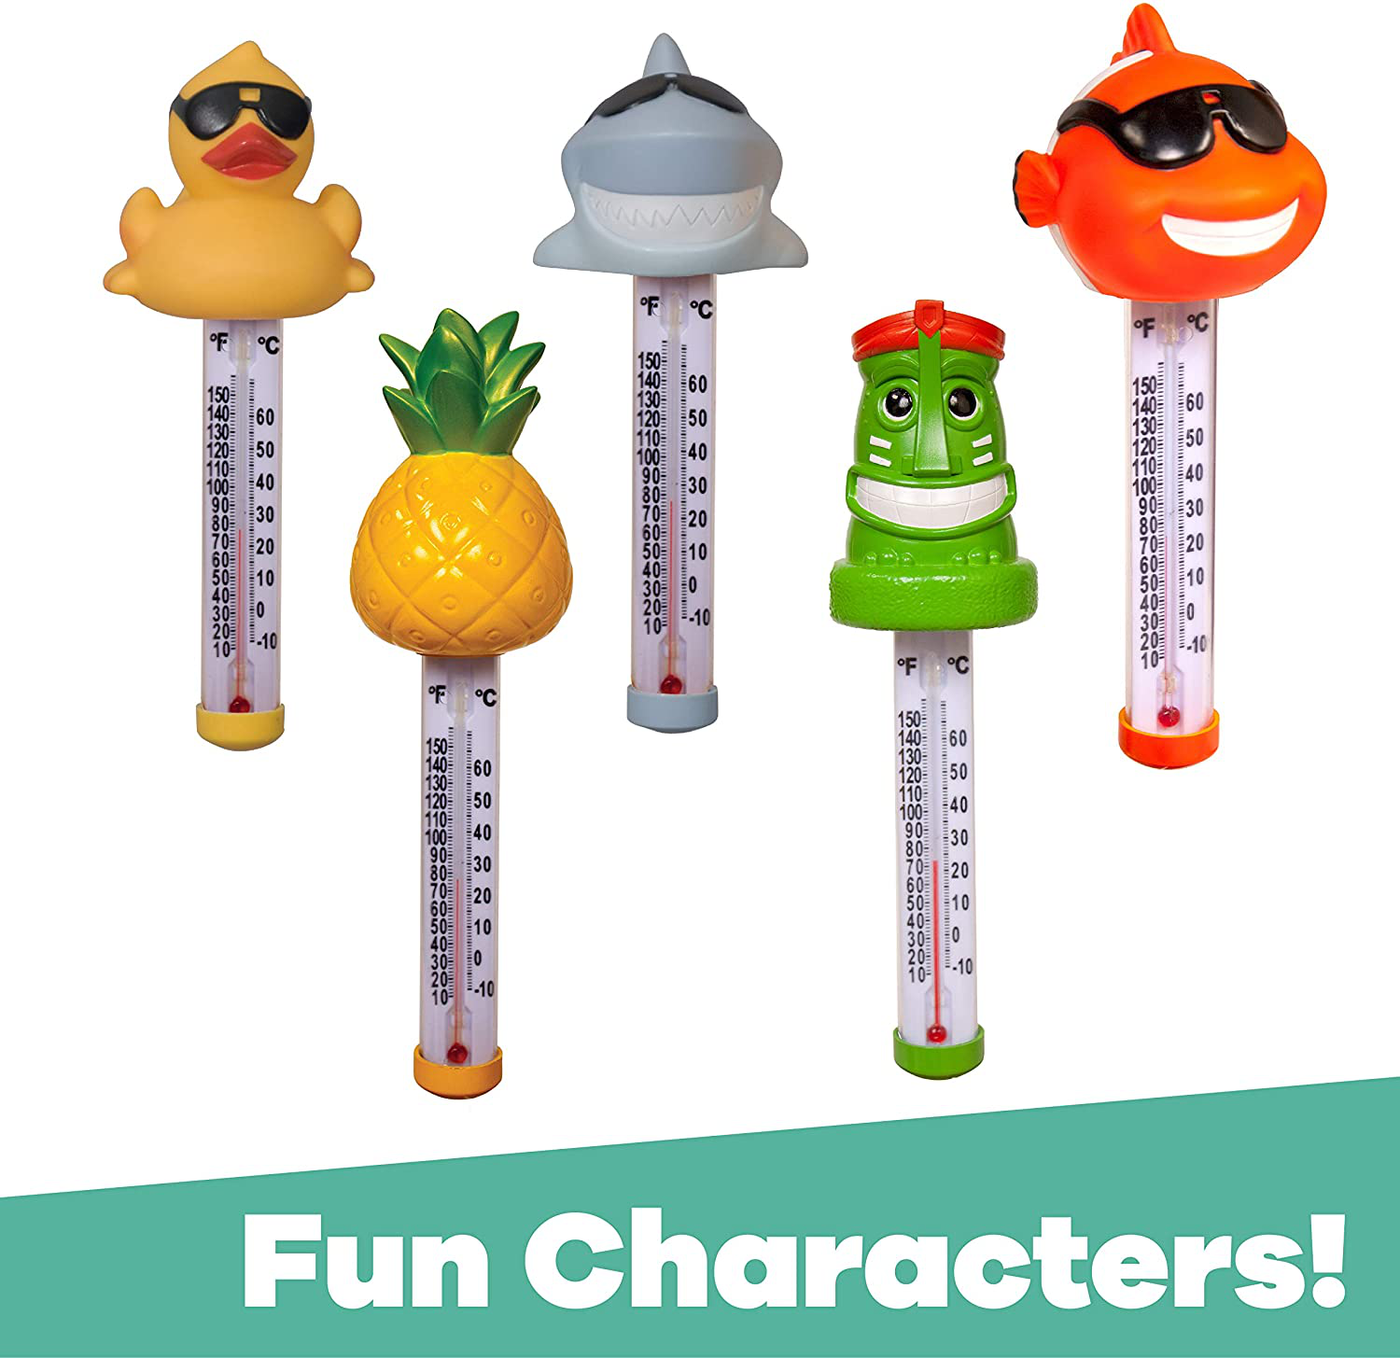 GAME 2700 Shark Spa and Pool Thermometer, Shatter-Resistant Casing Tether Included, Fahrenheit and Celsius, 9-in height x 3-1/2-in diameter